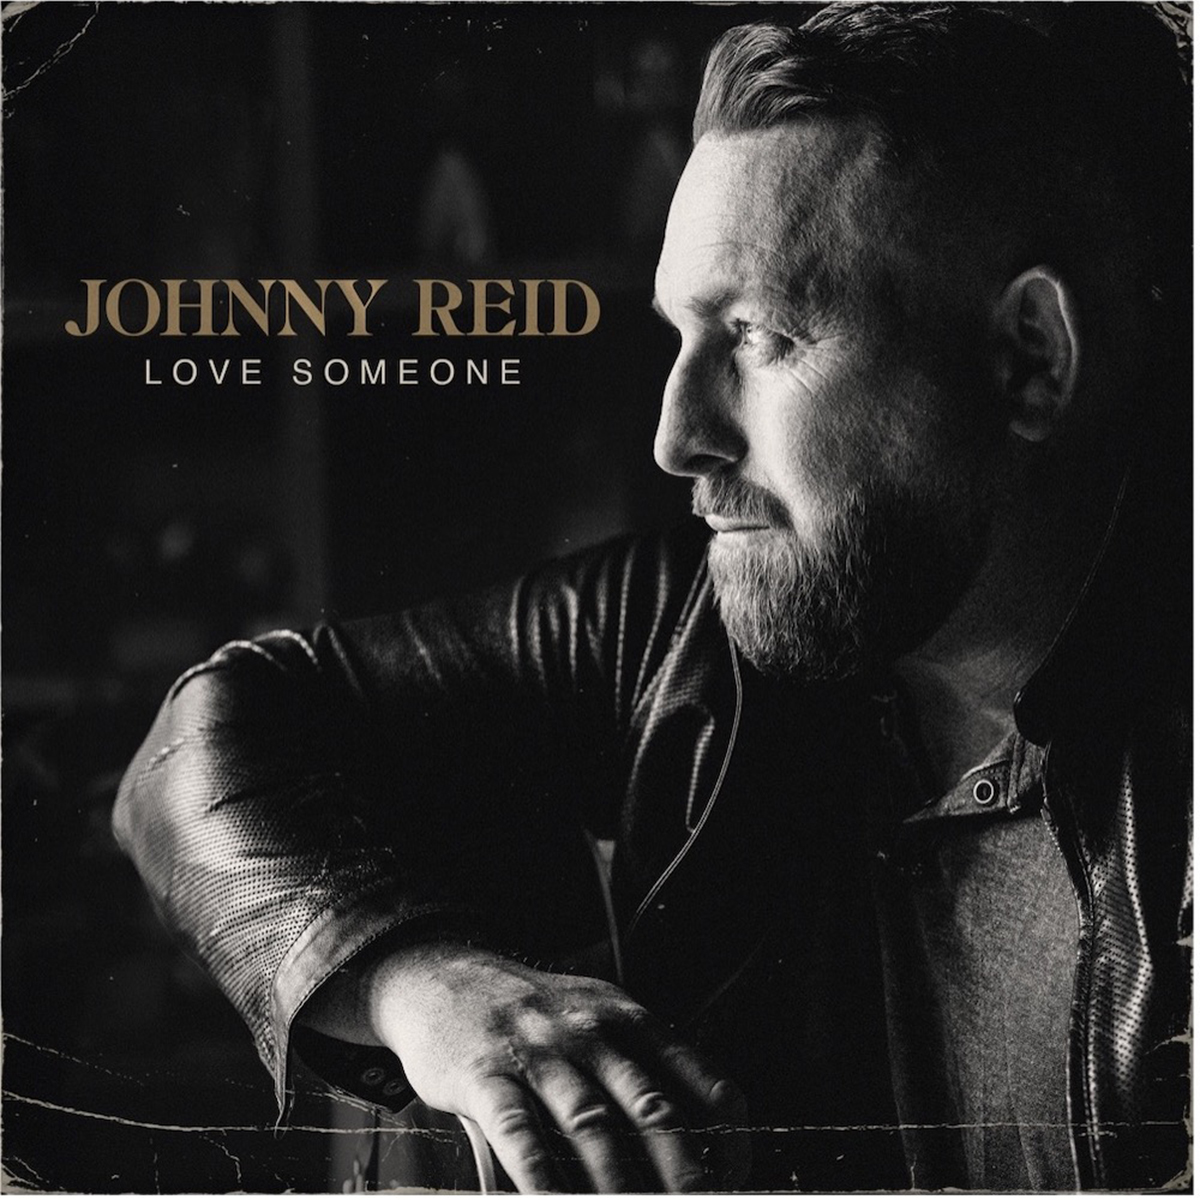 Johnny Reid - Love Someone - Now Available